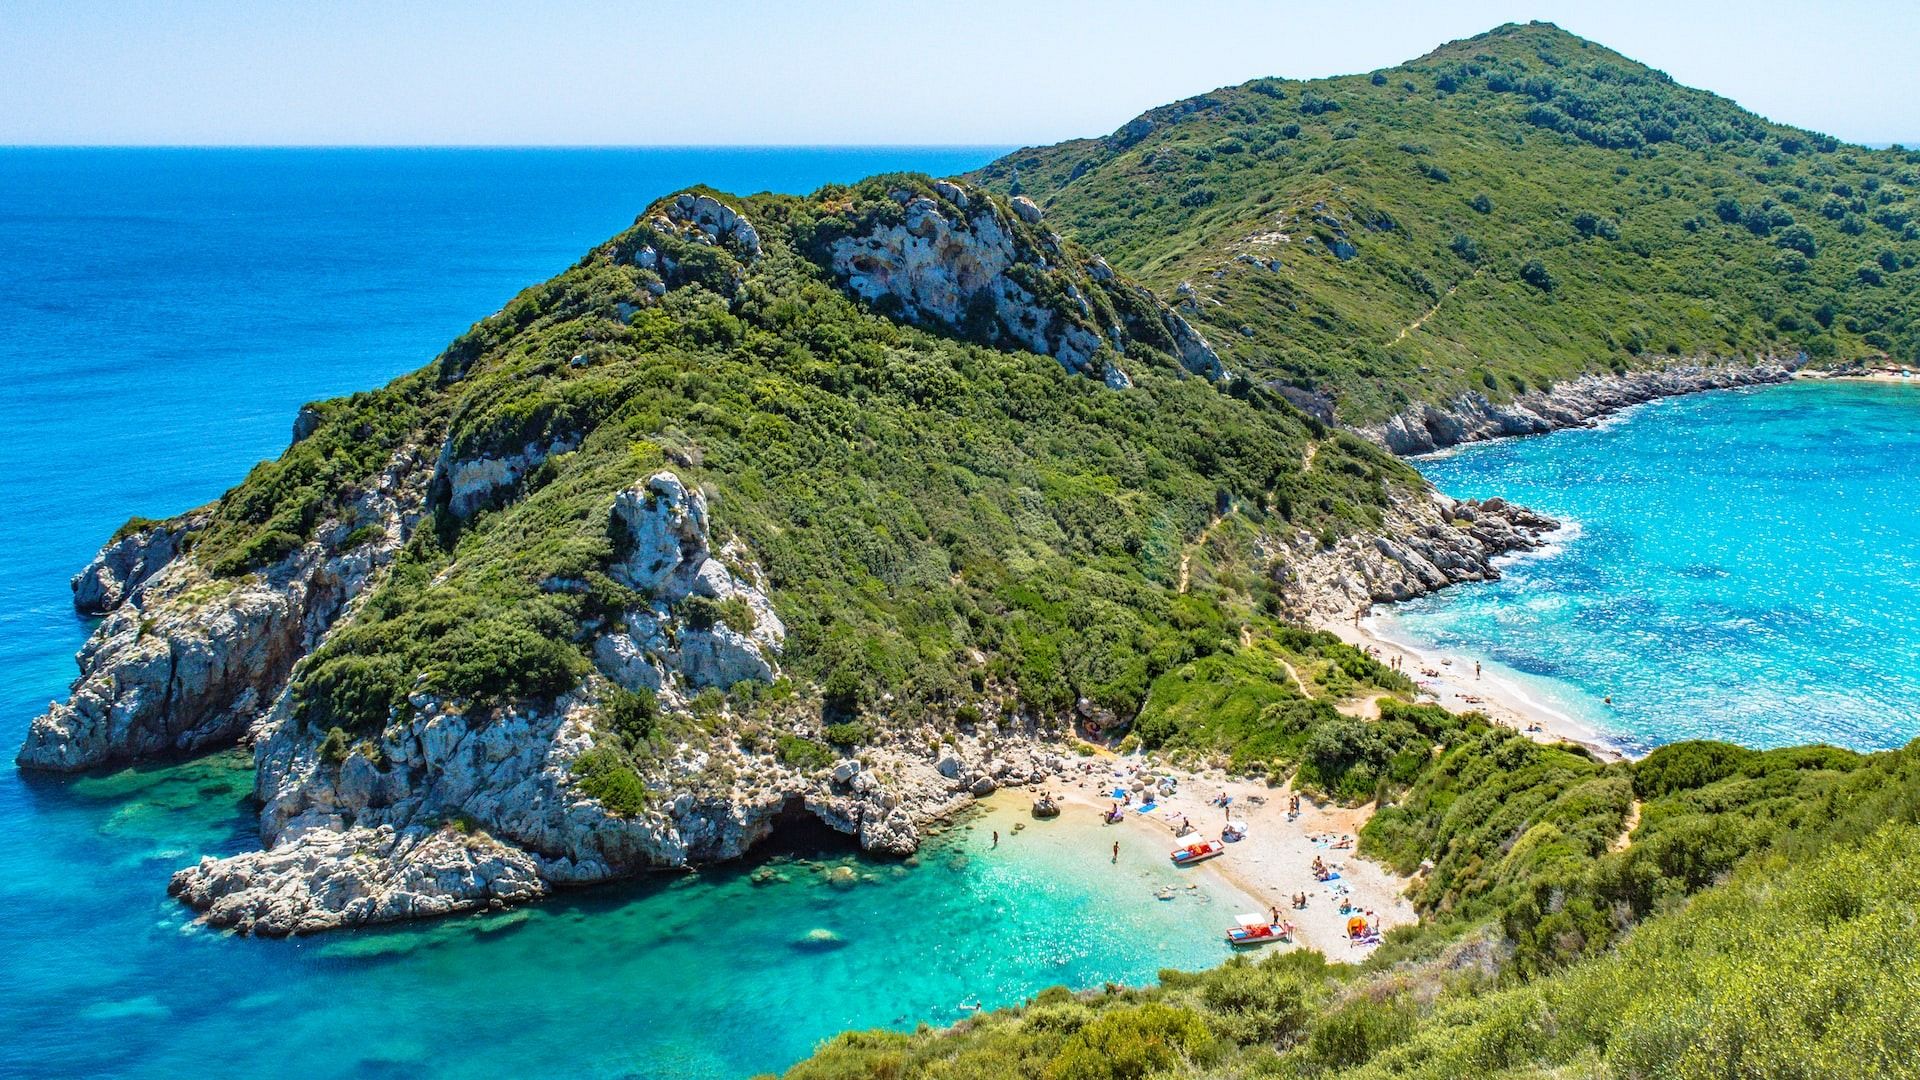 We are going to Corfu: where is the best place to stay?